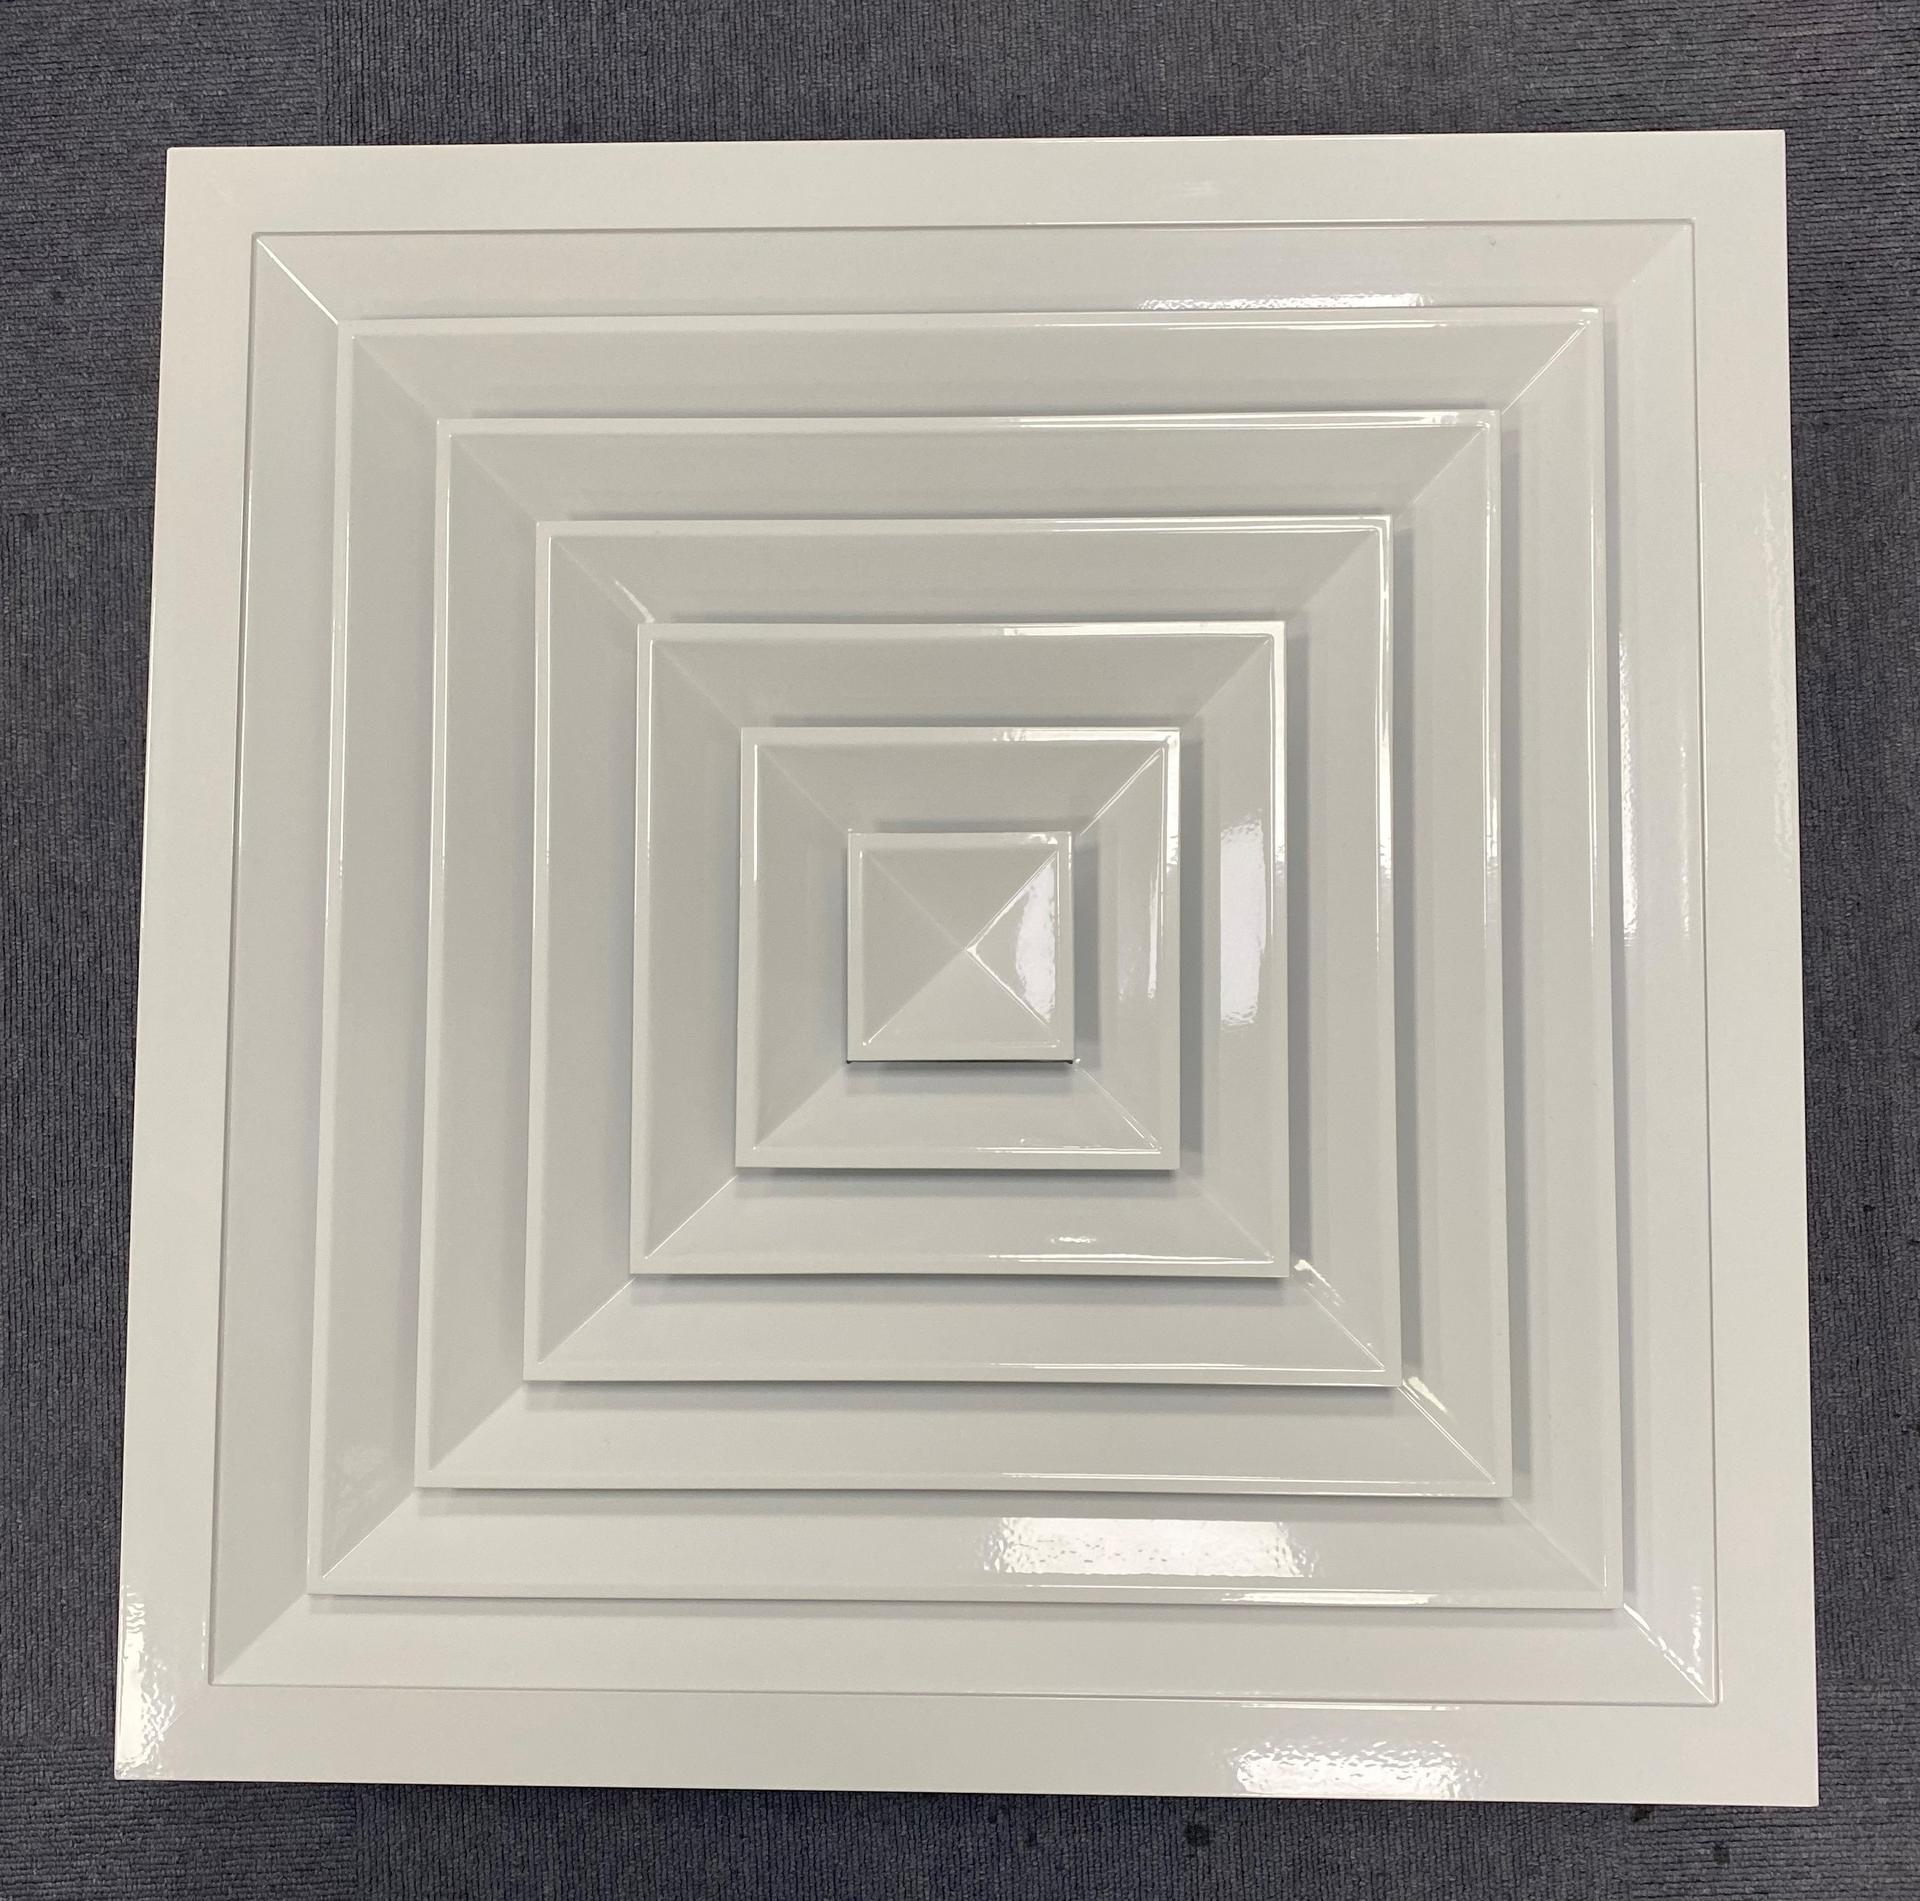 China Factory Ventech Free Sample Four Ways Flow Pattern Square Ceiling Diffuser